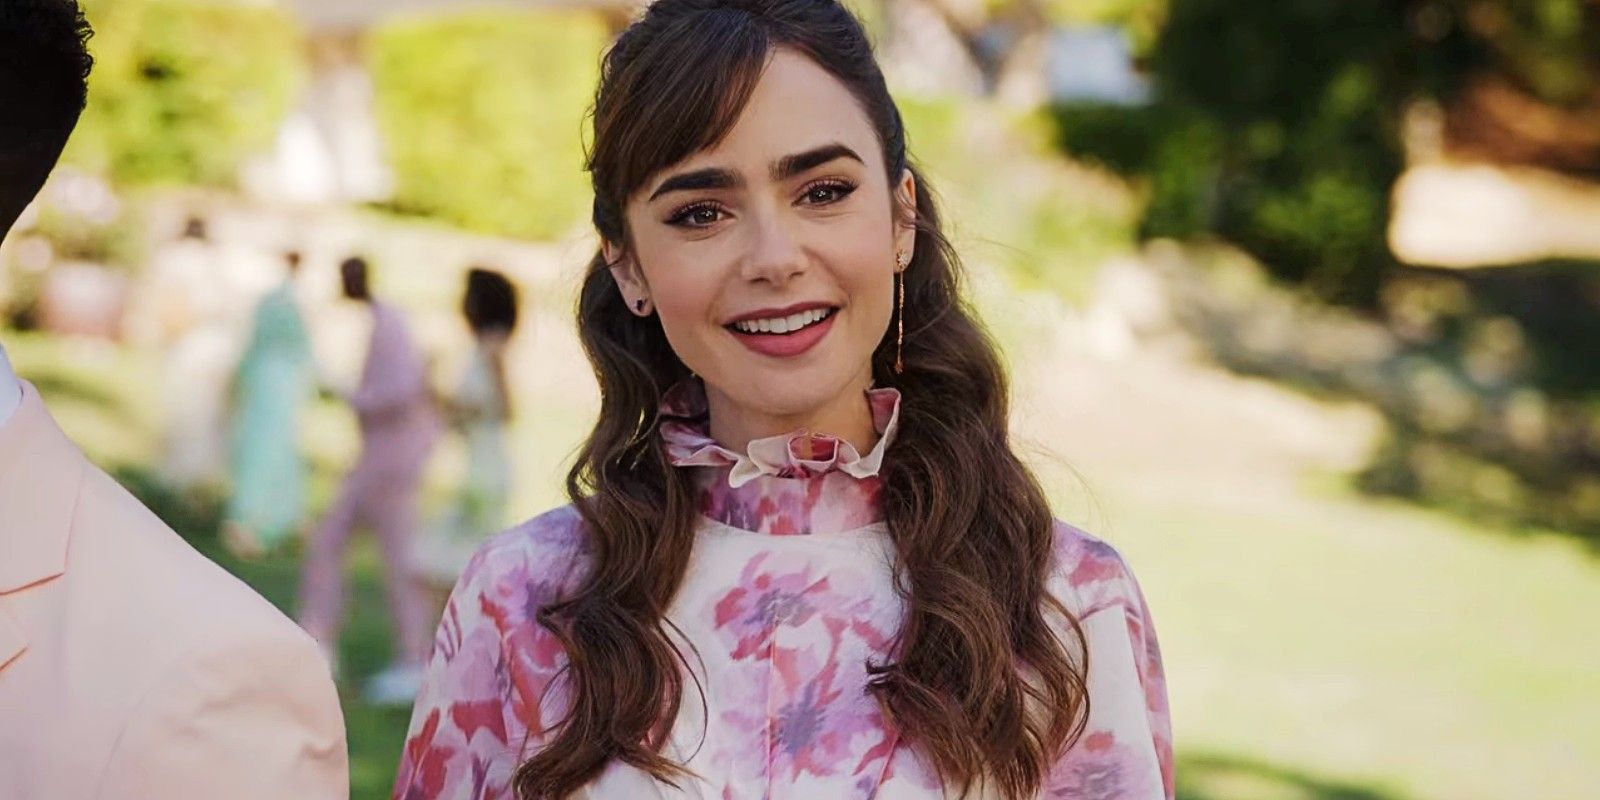 Lily Collins as Emily in Emily in Paris season 3 episode 10.